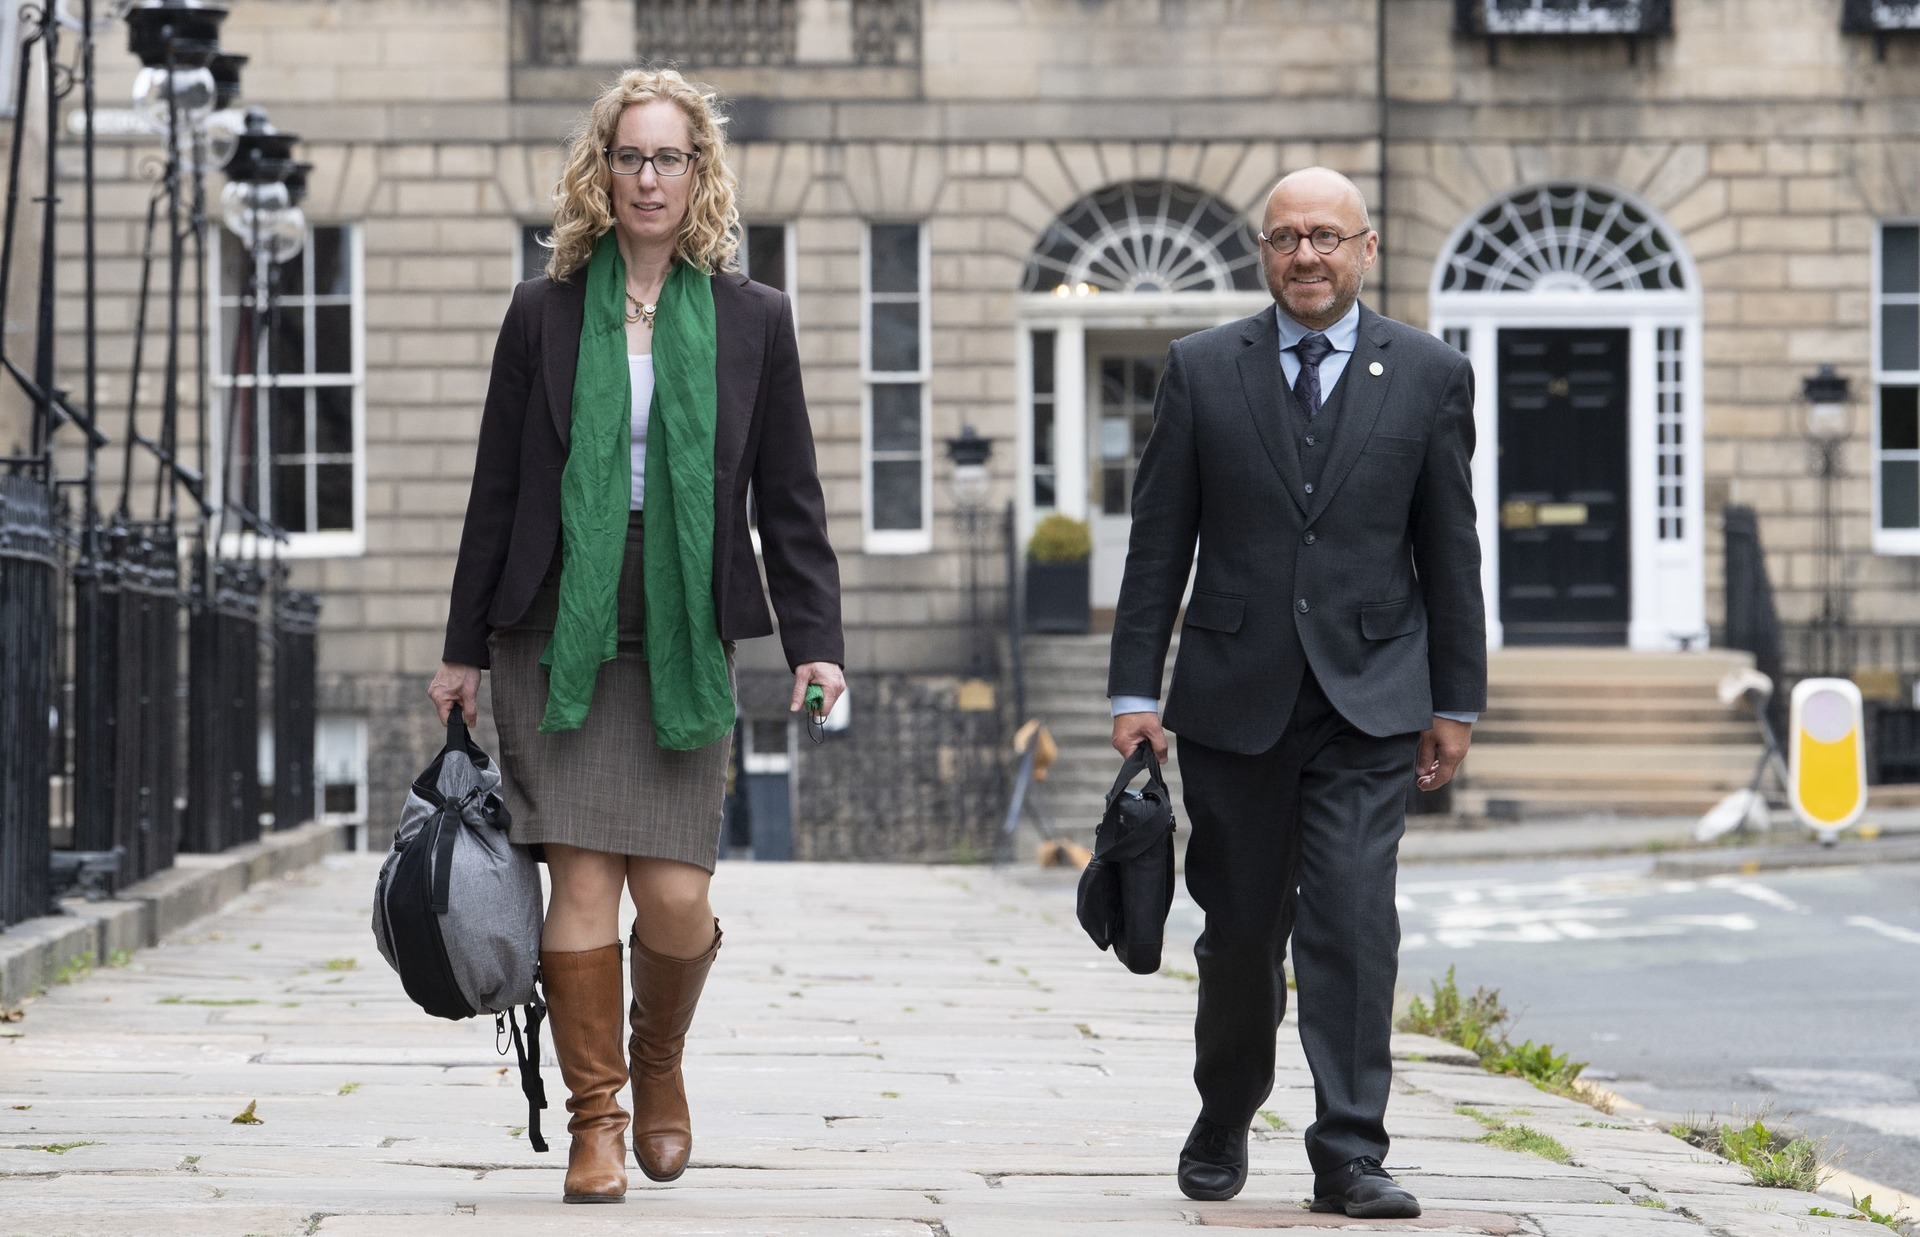 Scottish Green co-leaders Patrick Harvie and Lorna Slater became ministers at Holyrood as a result of the Bute House Agreement.